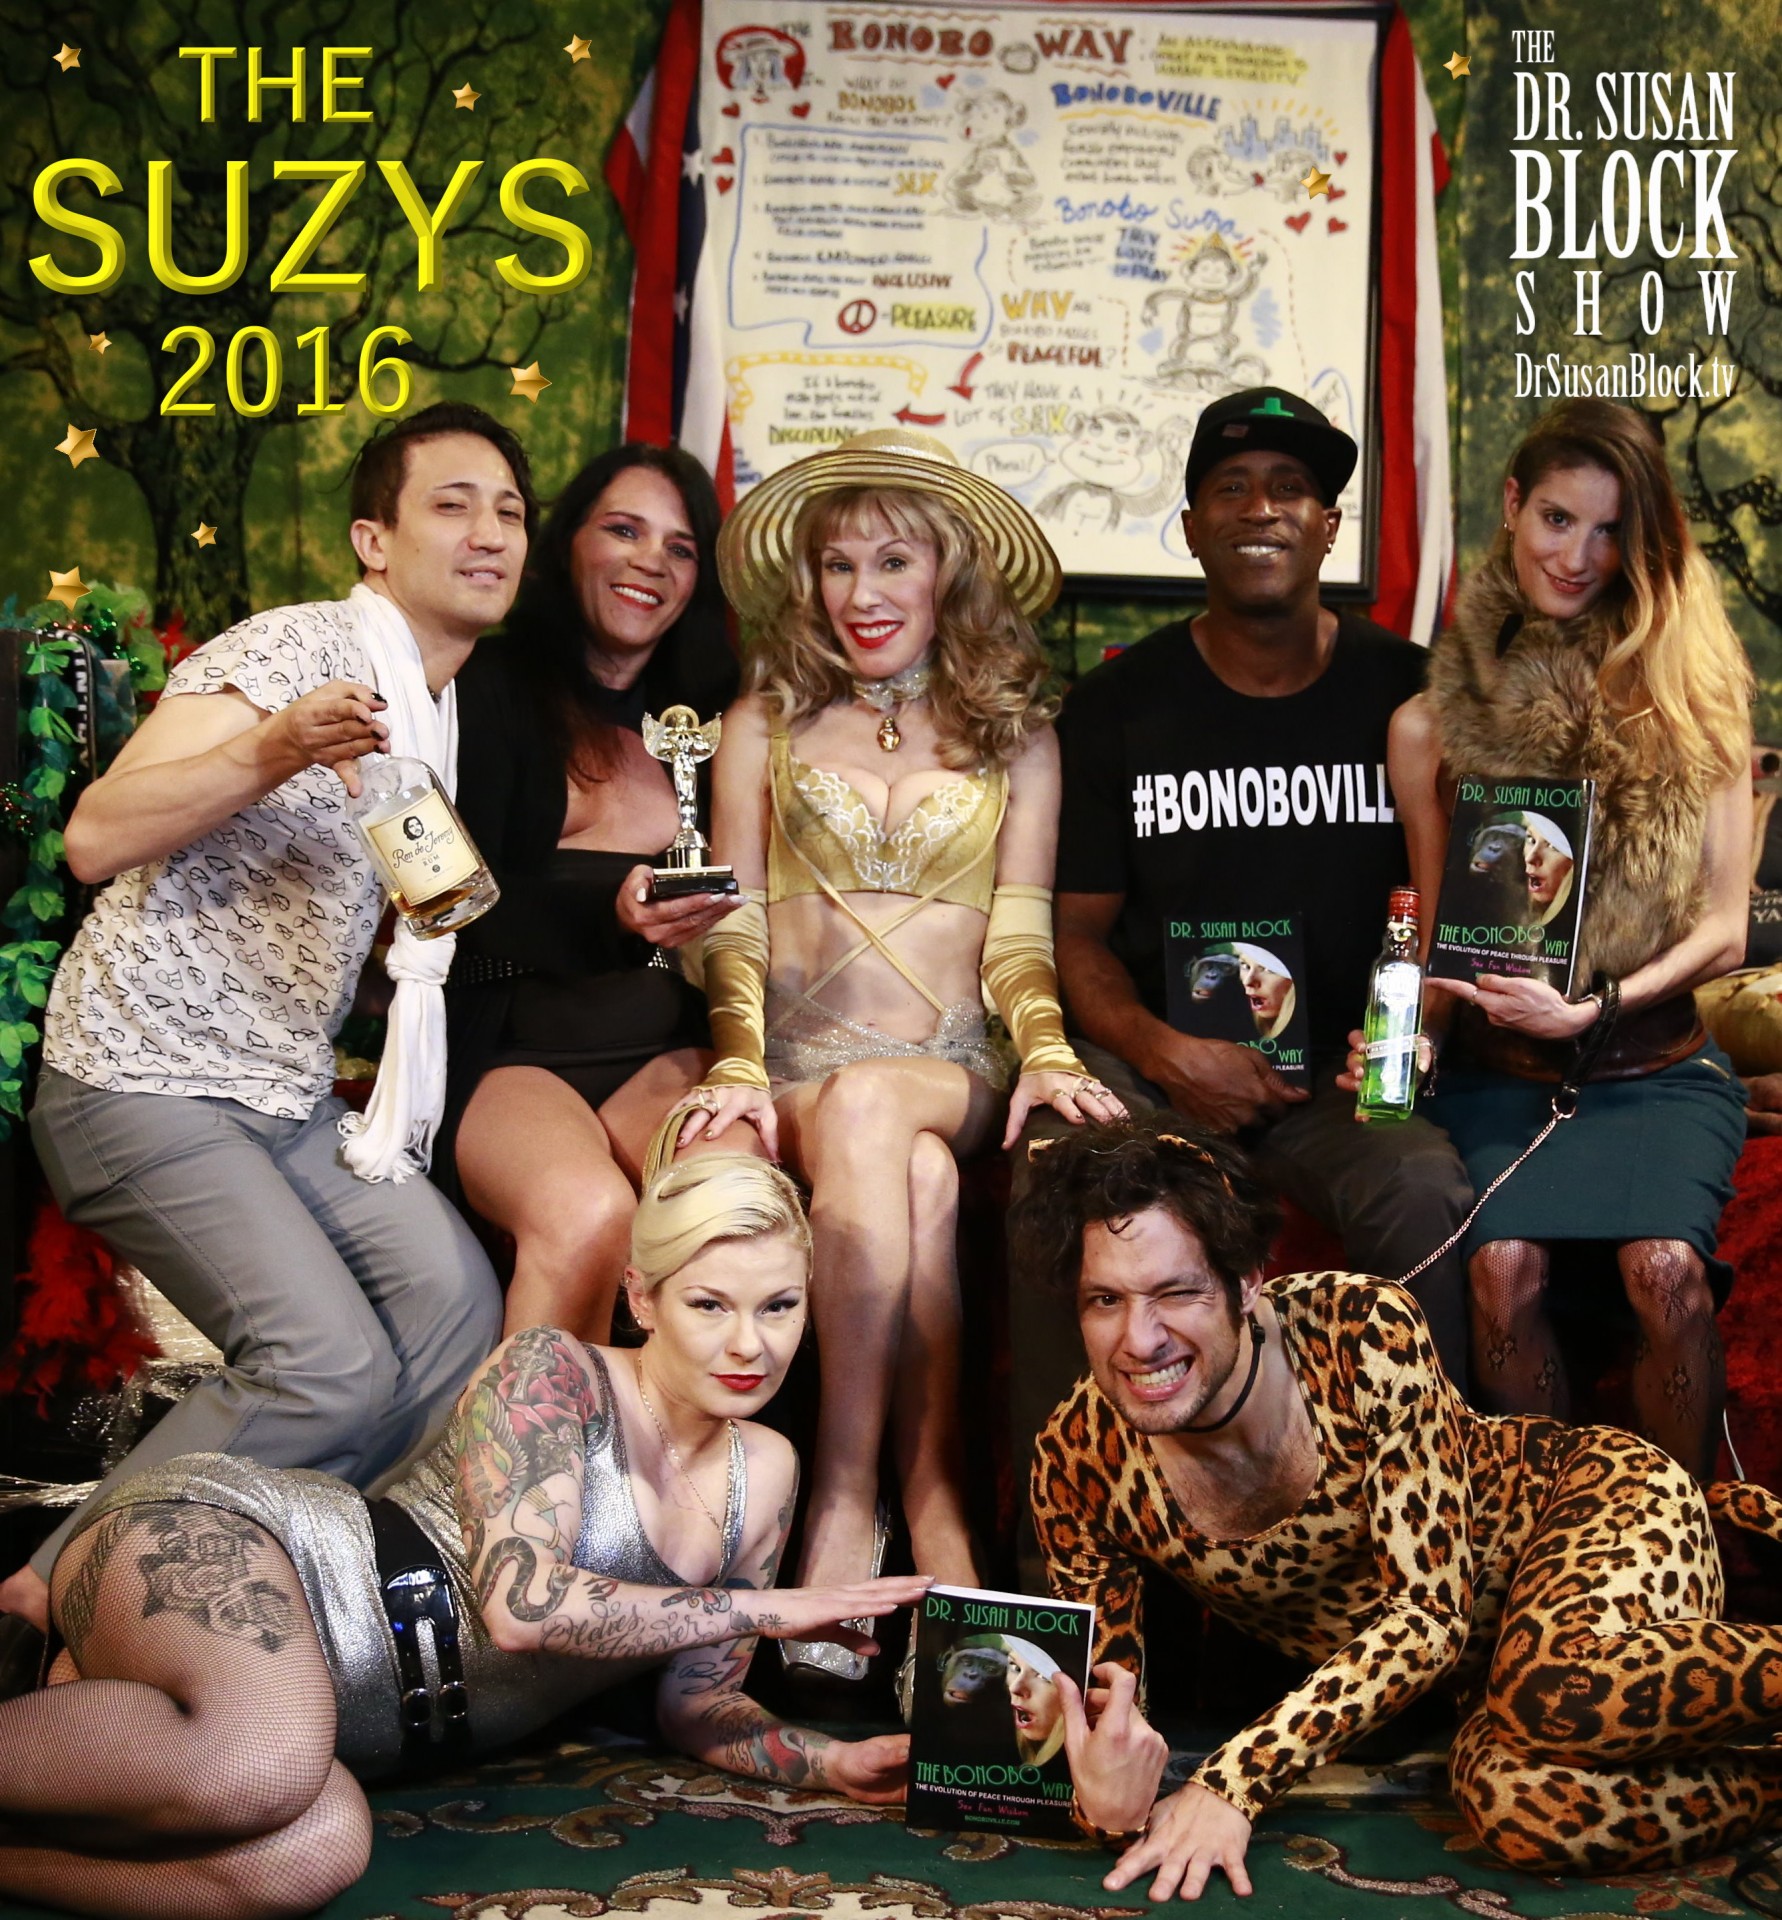 It’s The SUZYs! Announcing the 5th annual DrSusanBlock.Tv Awards for 2016